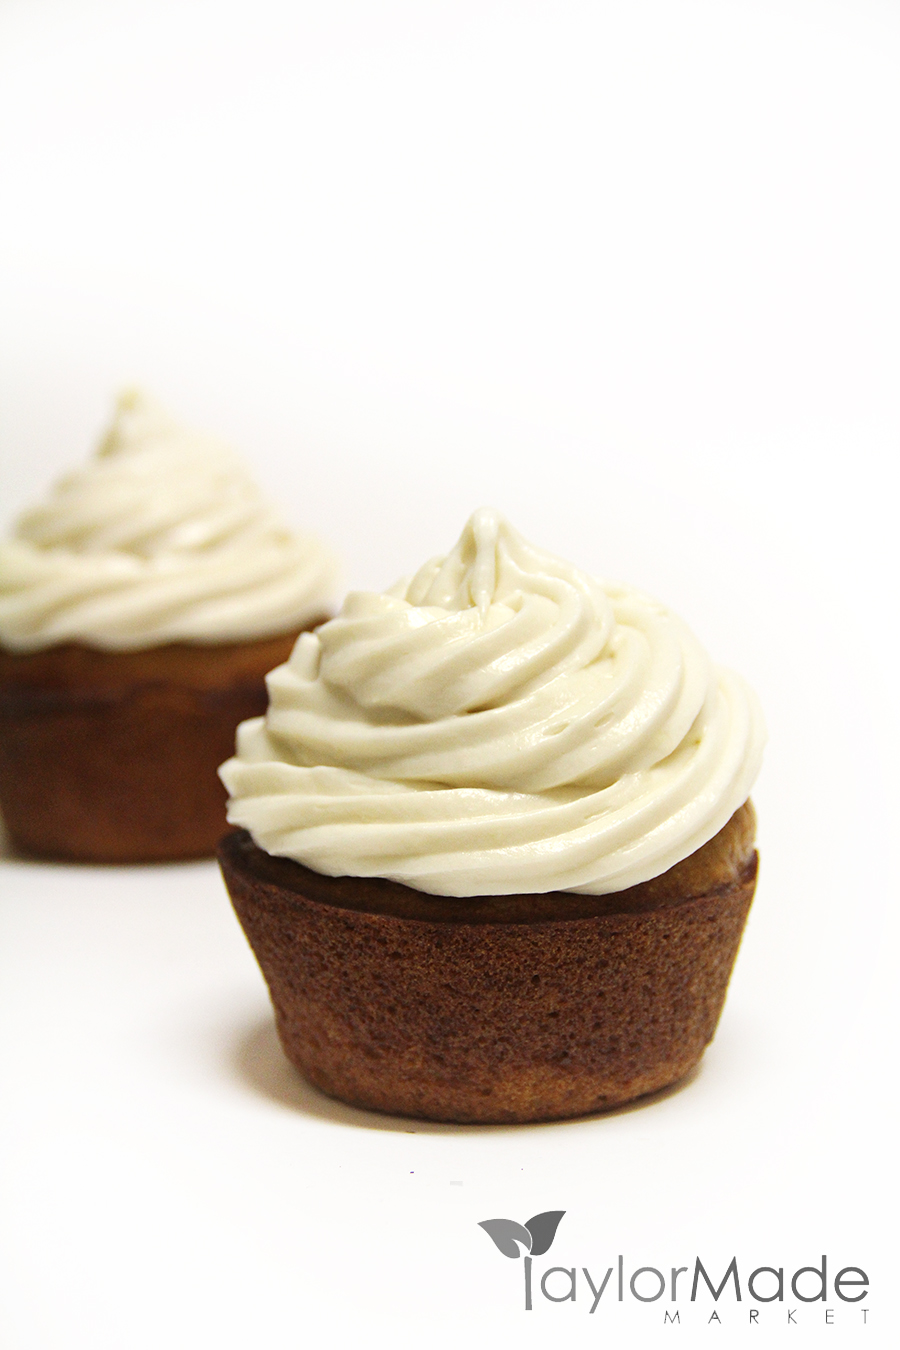 cupcake frosted on white vertical